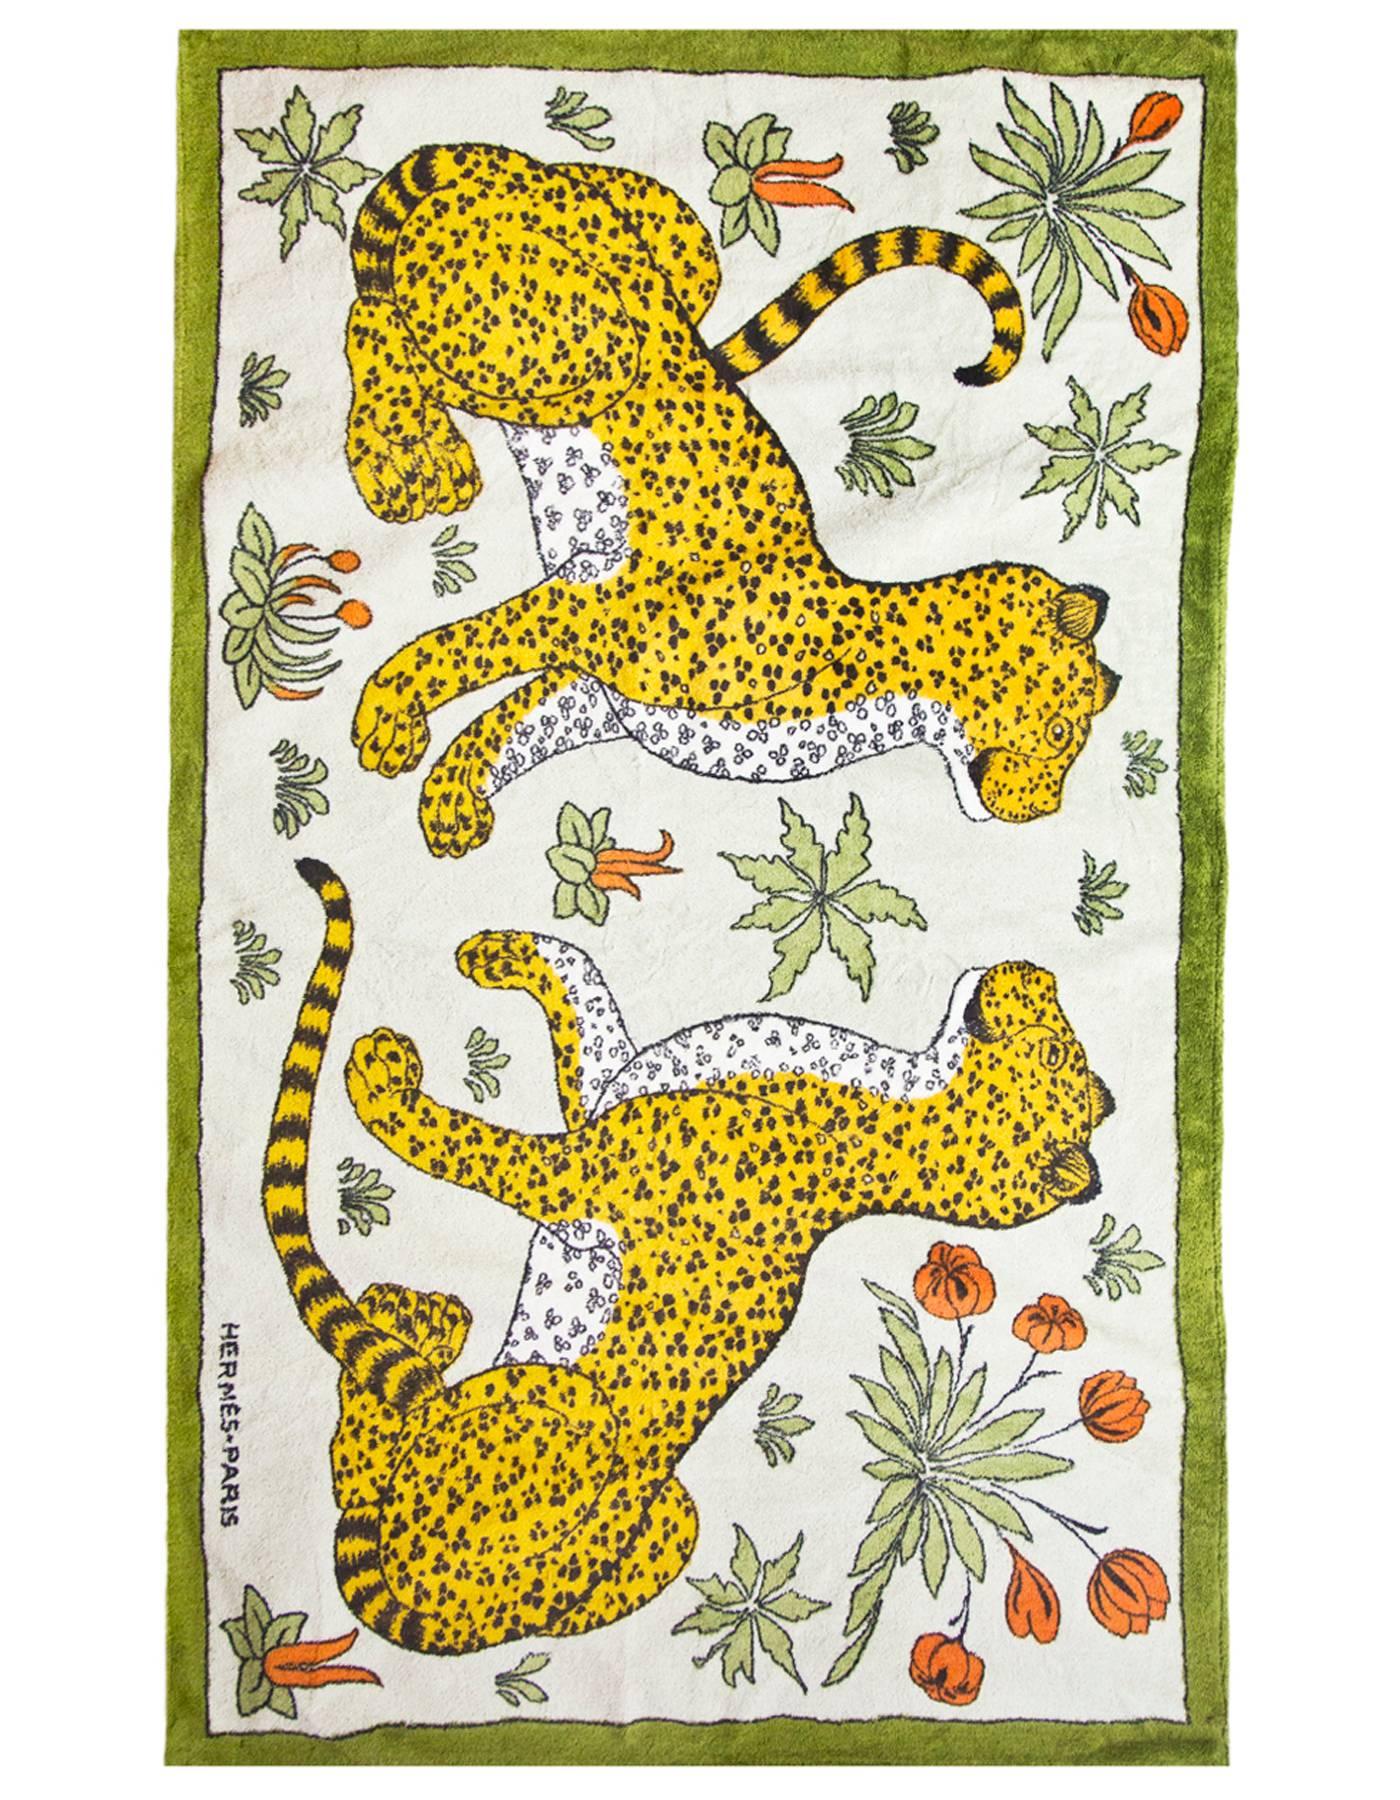 Hermes Green Leopard Print Beach Towel

Made In: France
Color: Green, yellow
Composition: 100% cotton
Retail Price: $600 + tax
Overall Condition: Excellent pre-owned condition, general fading

Measurements: 
Towel: 58